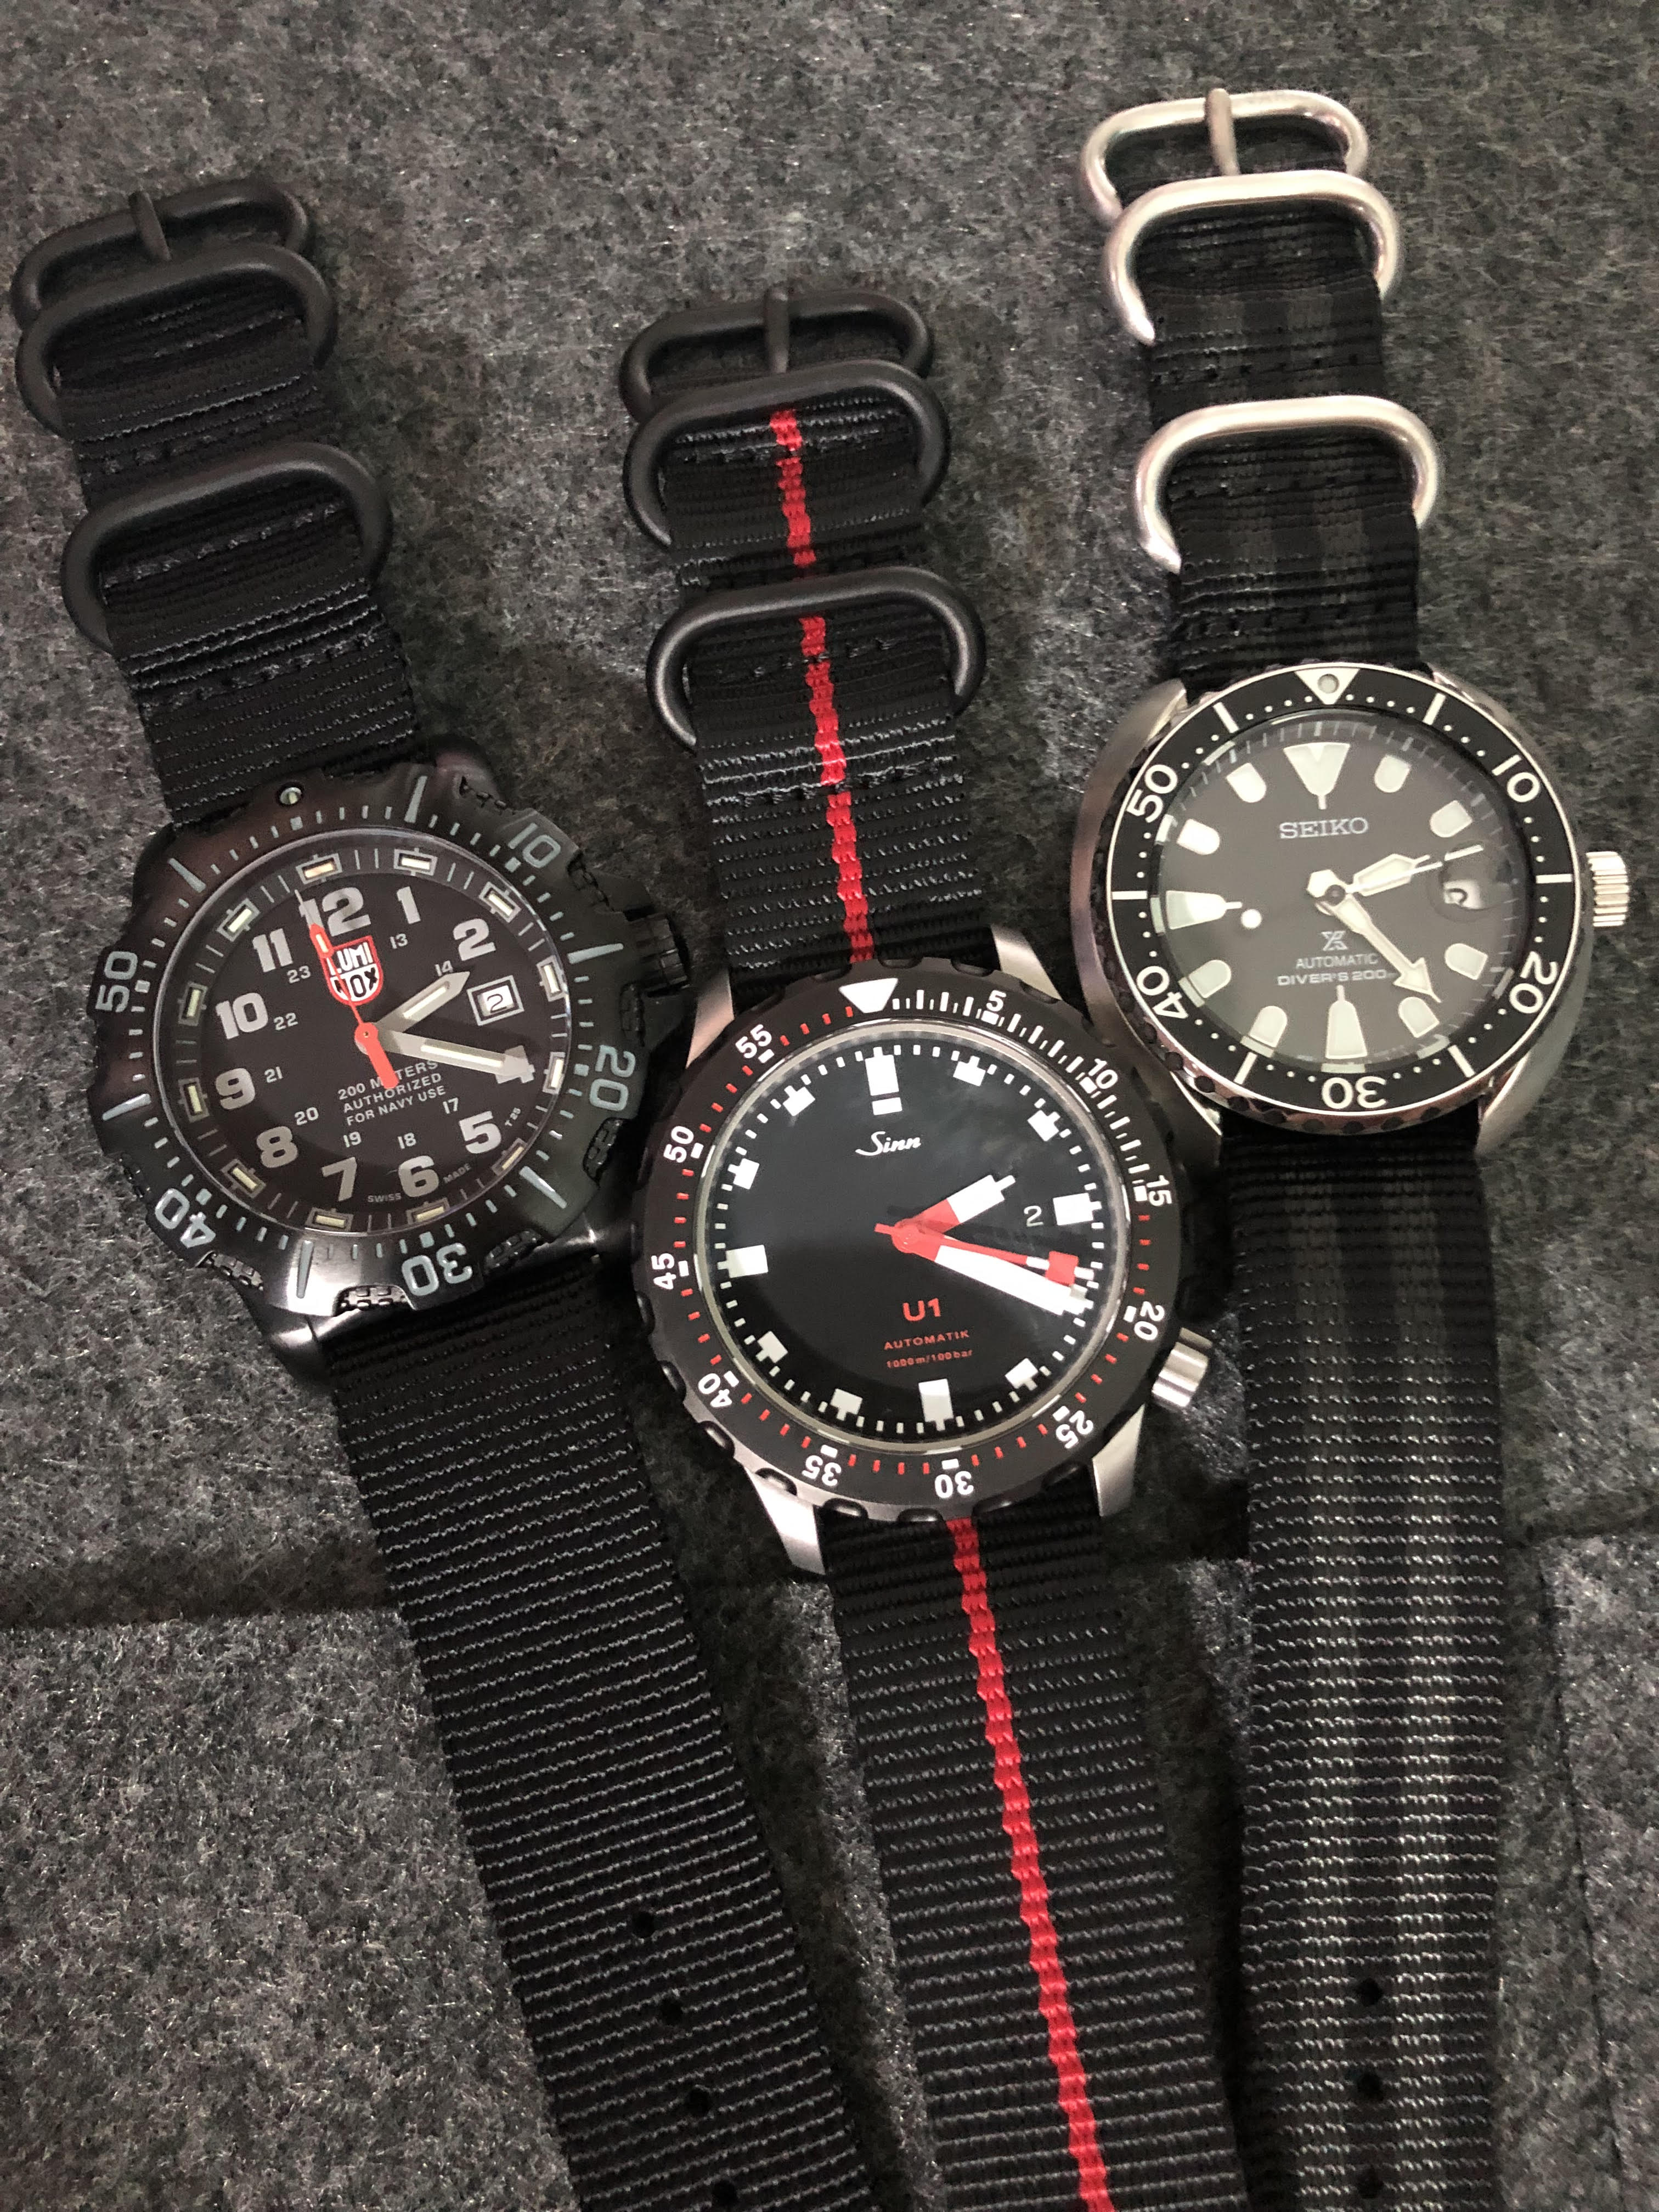 Watches with Vario Ballistic Nylon strap by #varioeveryday member Clint